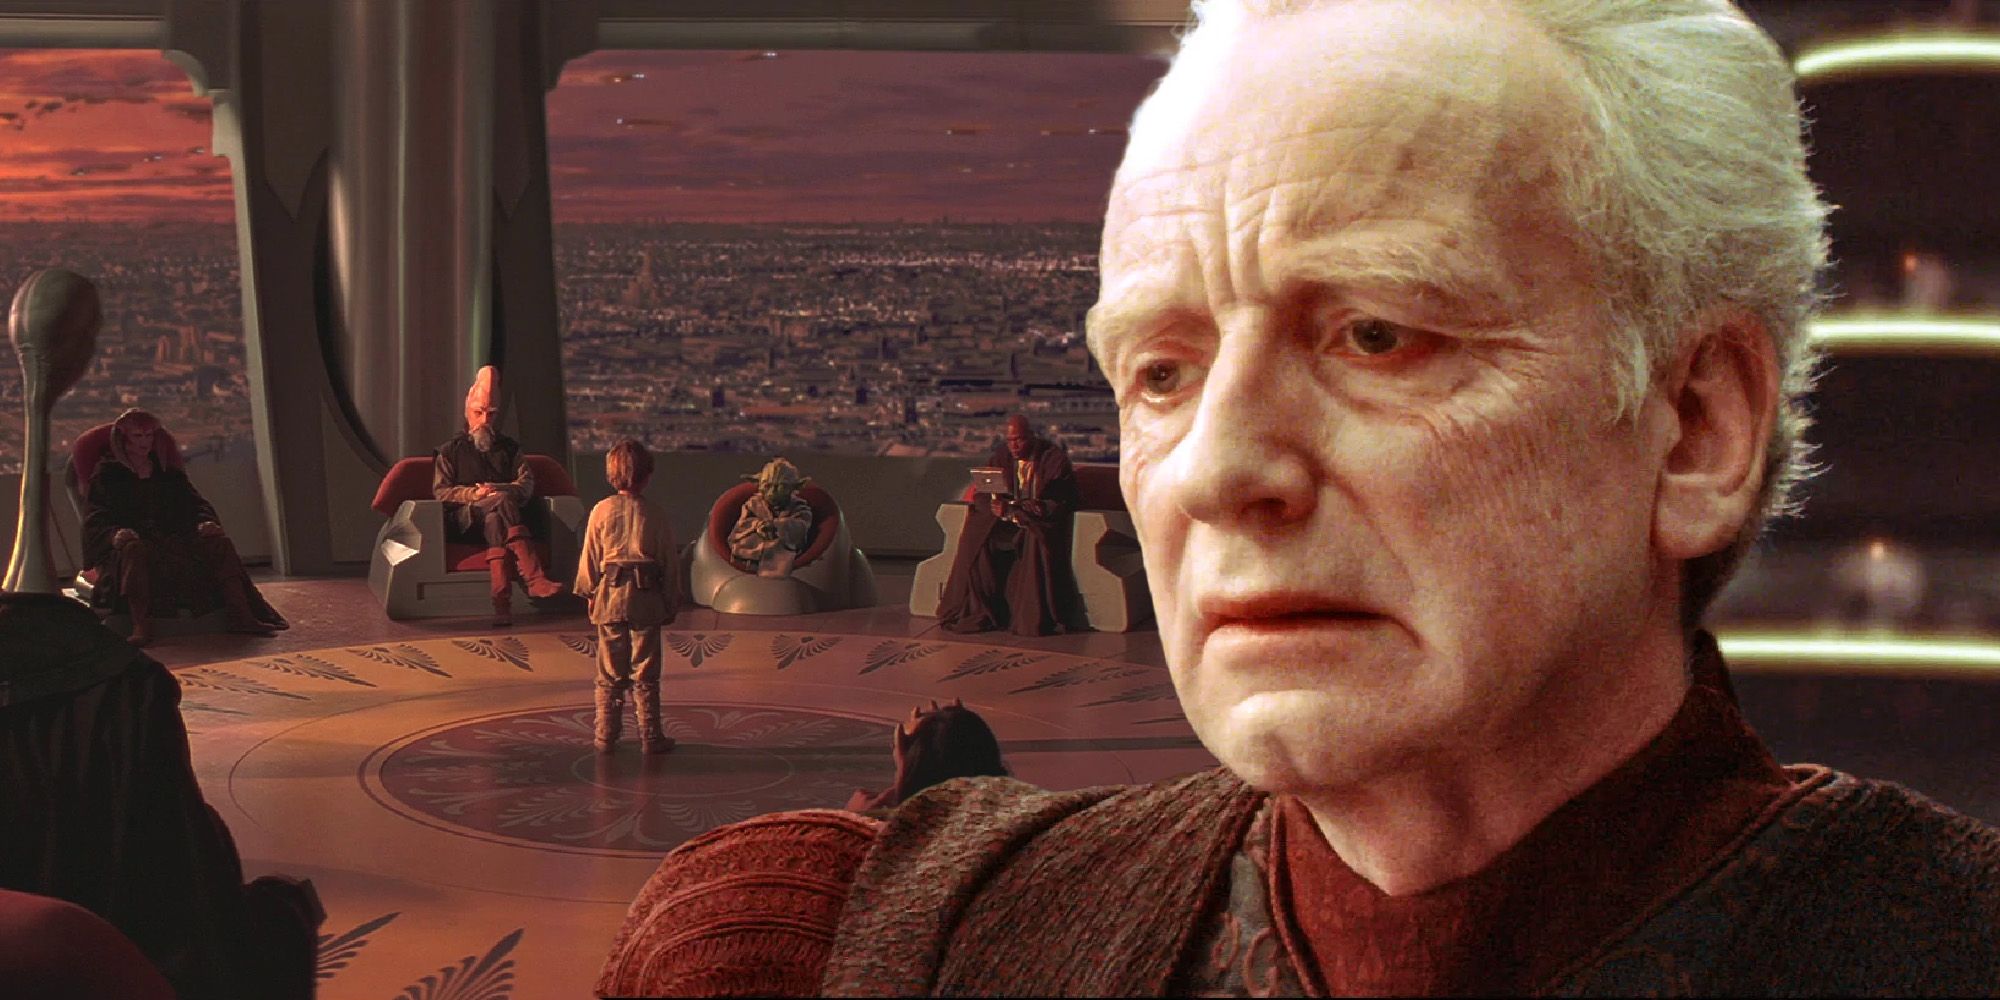 Chancellor Palpatine in the foreground and the Jedi Council with Anakin in front of them in the background both in Star Wars: The Phantom Menace.